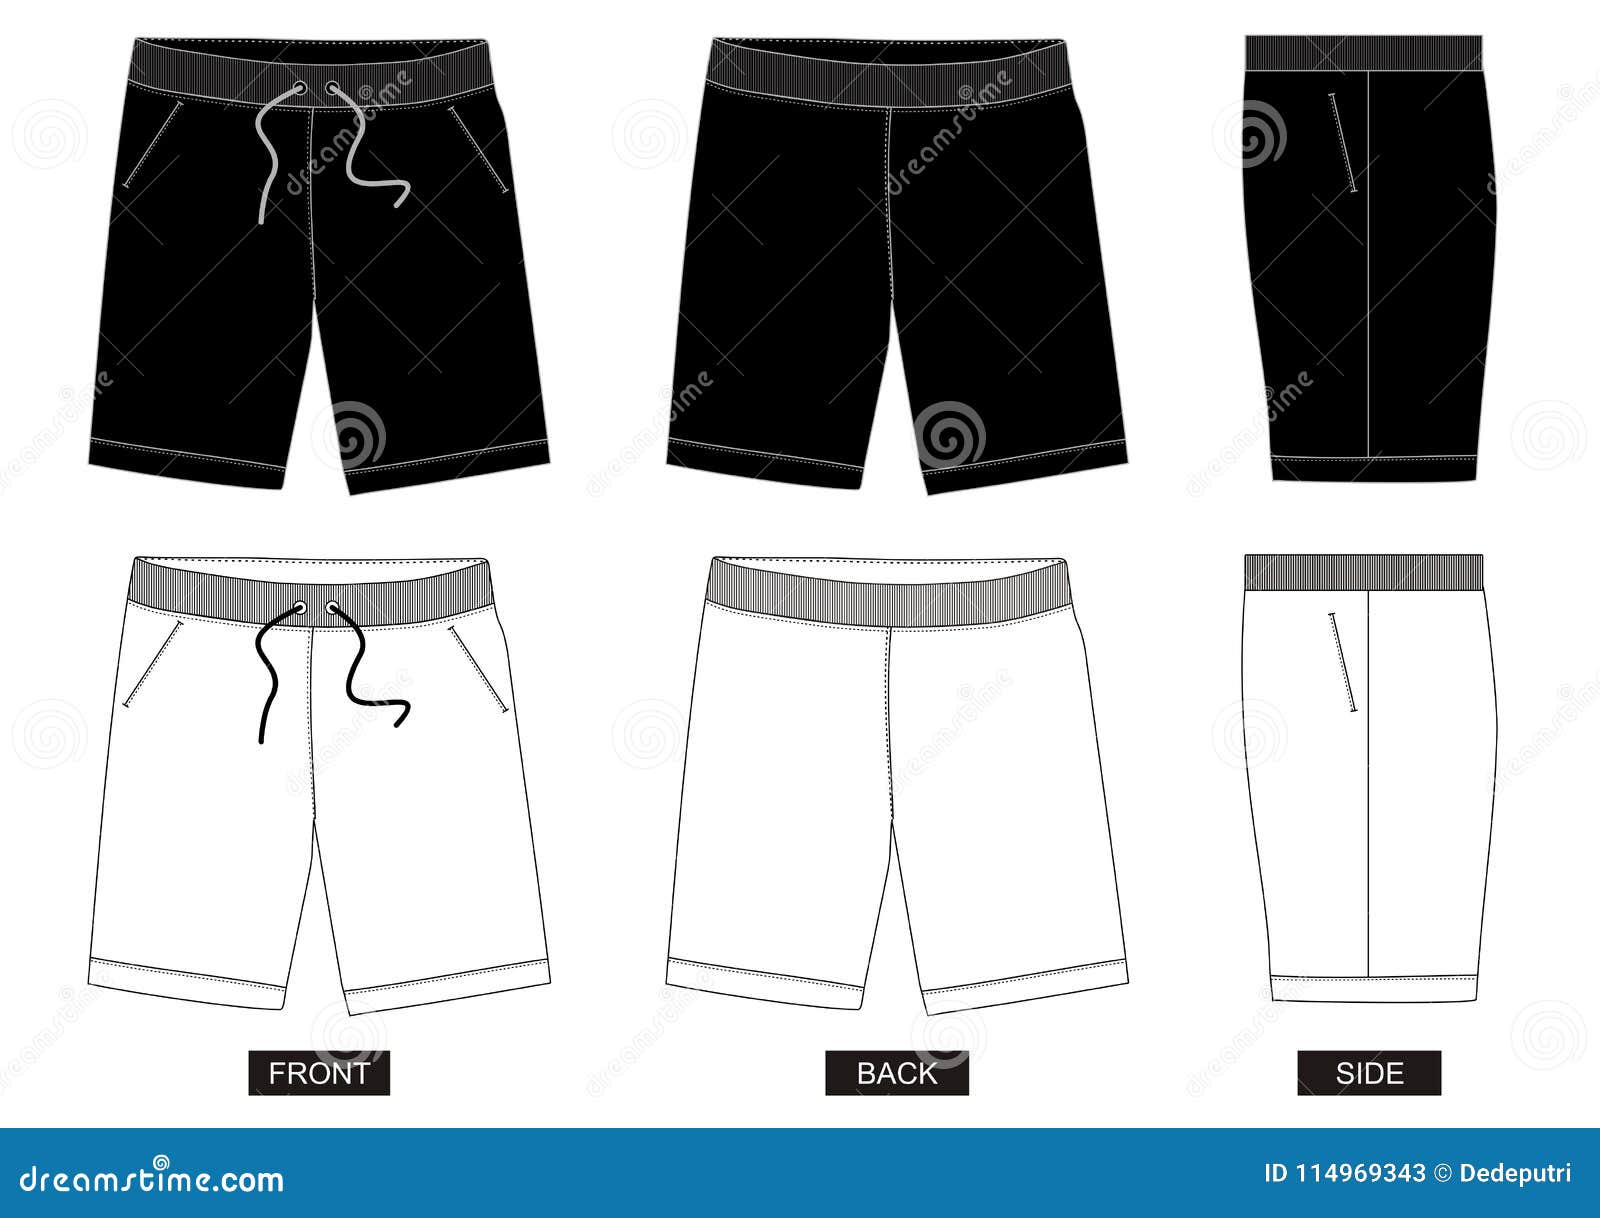 Download Vector Shorts Template Stock Illustrations 4 992 Vector Shorts Template Stock Illustrations Vectors Clipart Dreamstime